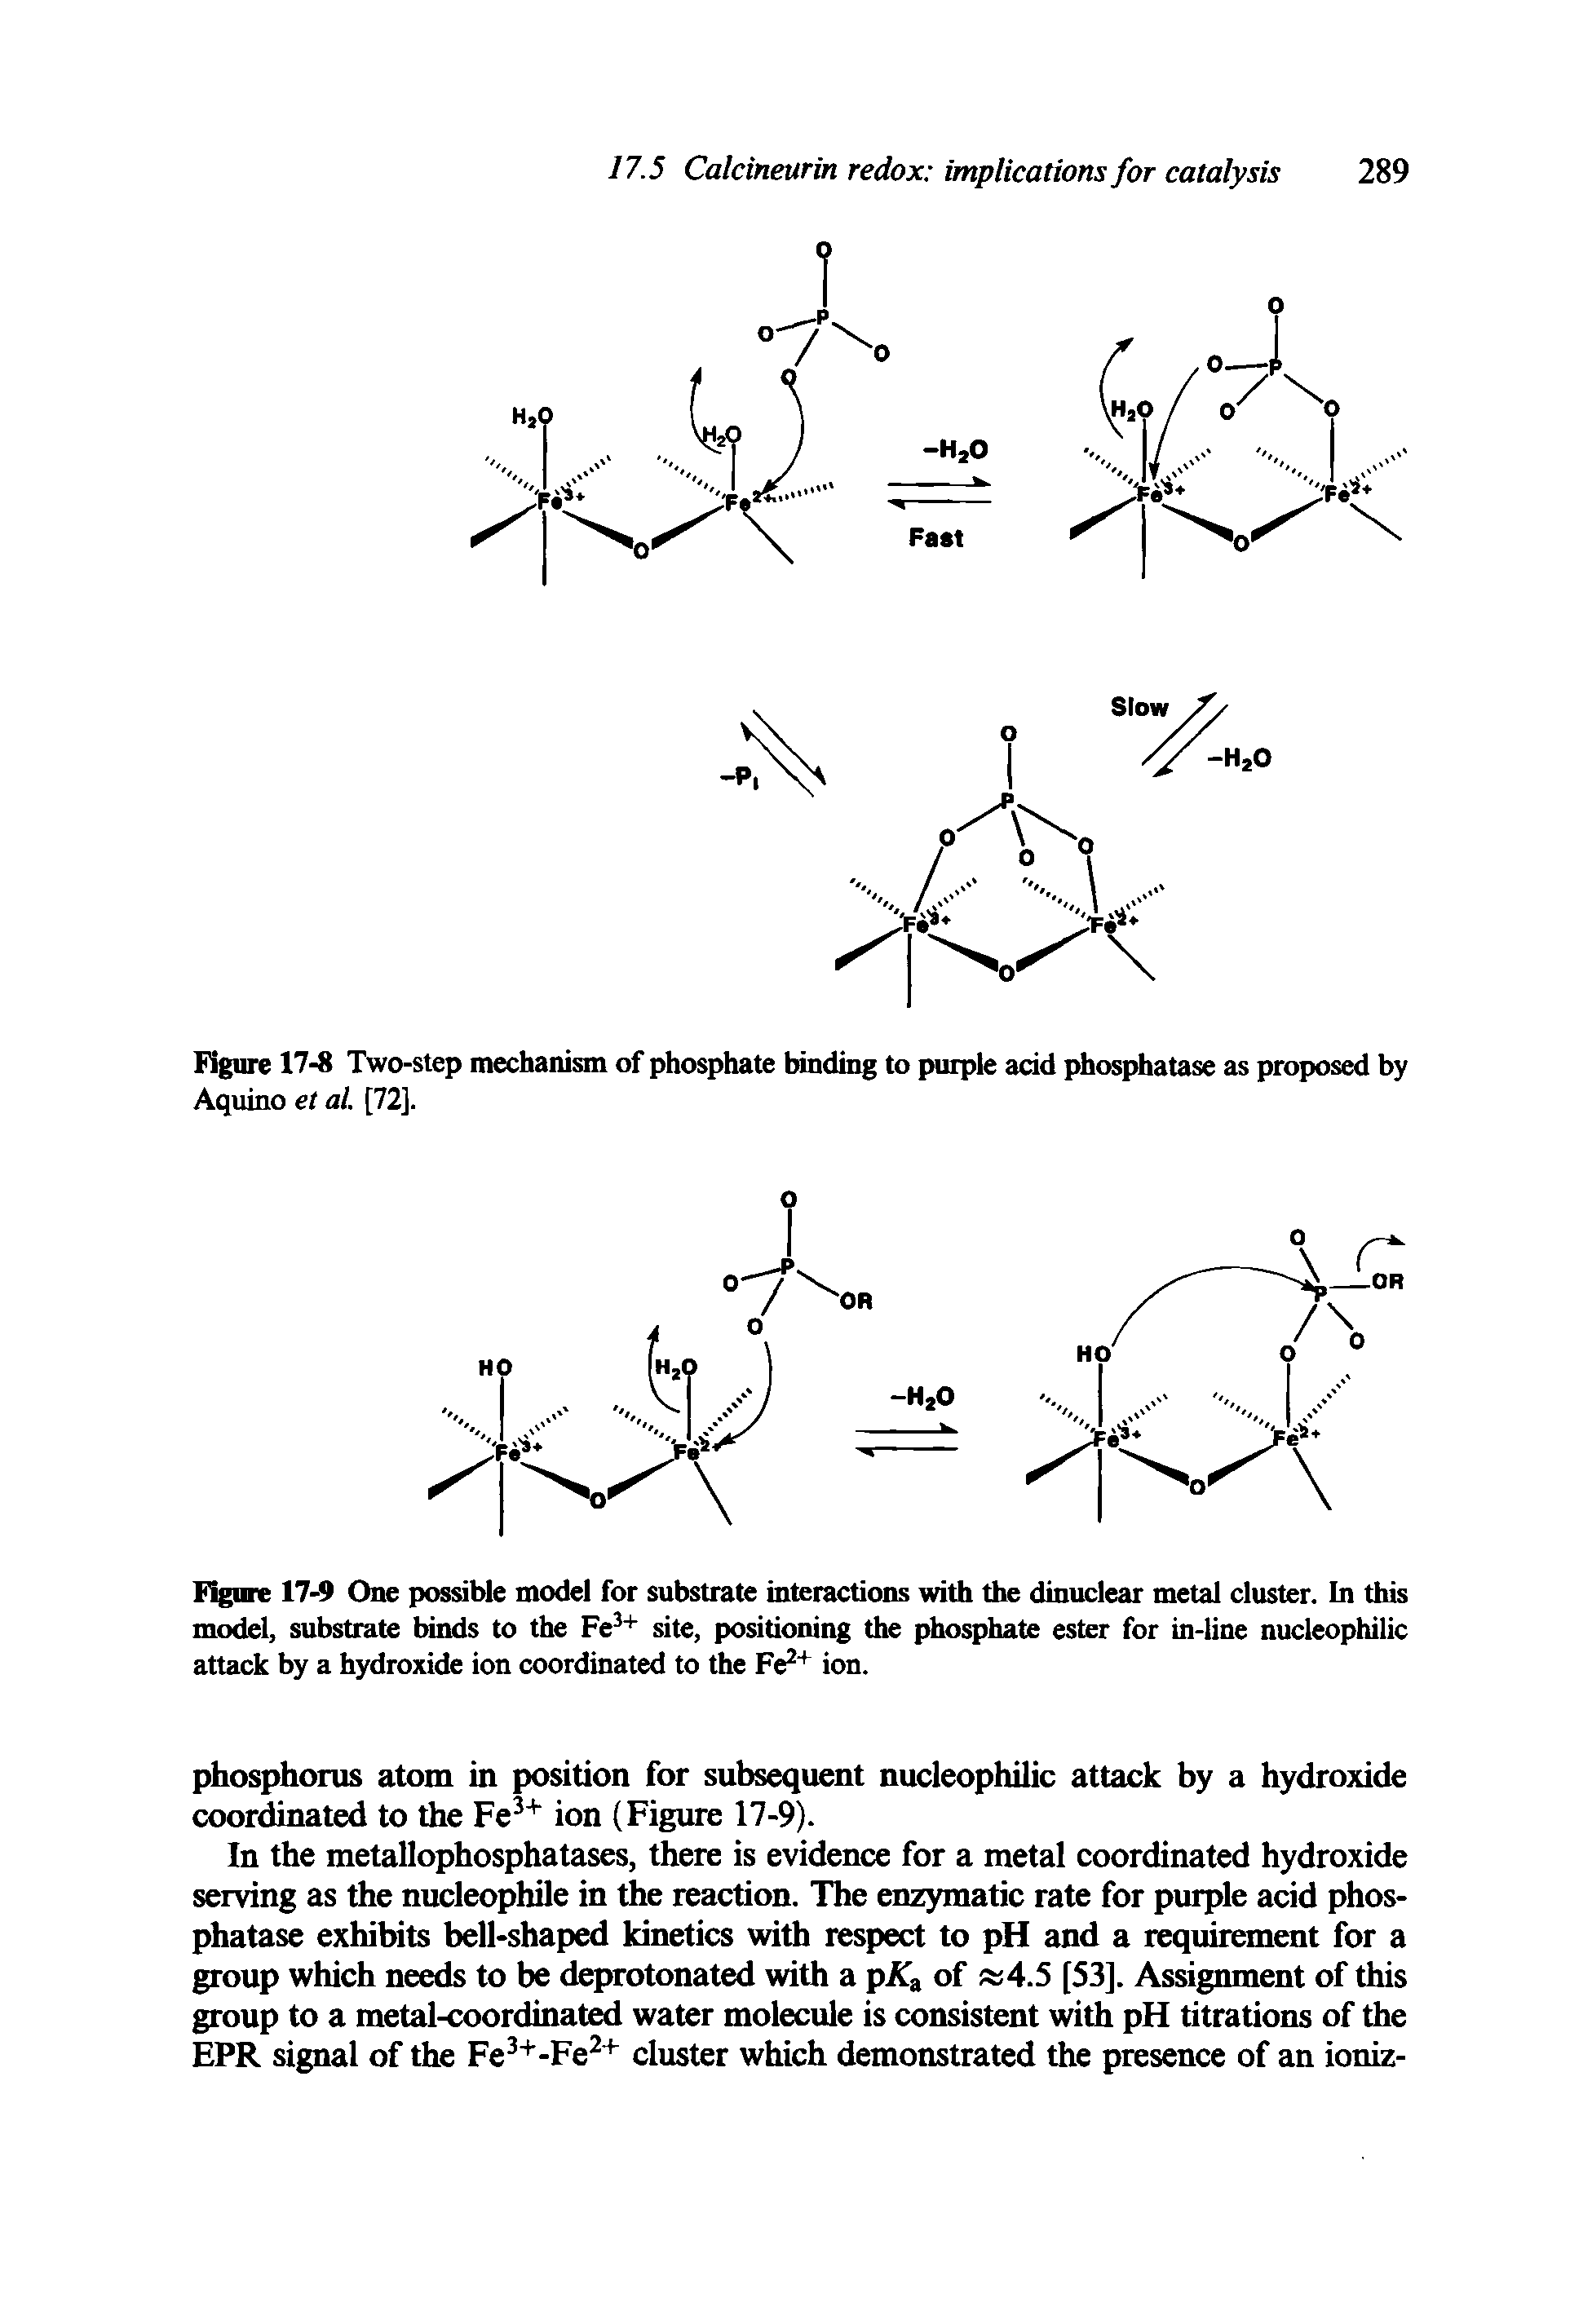 Figure 17-9 One possible model for substrate interactions with the dinuclear metal cluster. In this model, substrate binds to the Fe site, positioning the phosphate ester for in-line nucleophilic attack by a hydroxide ion coordinated to the Fe + ion.